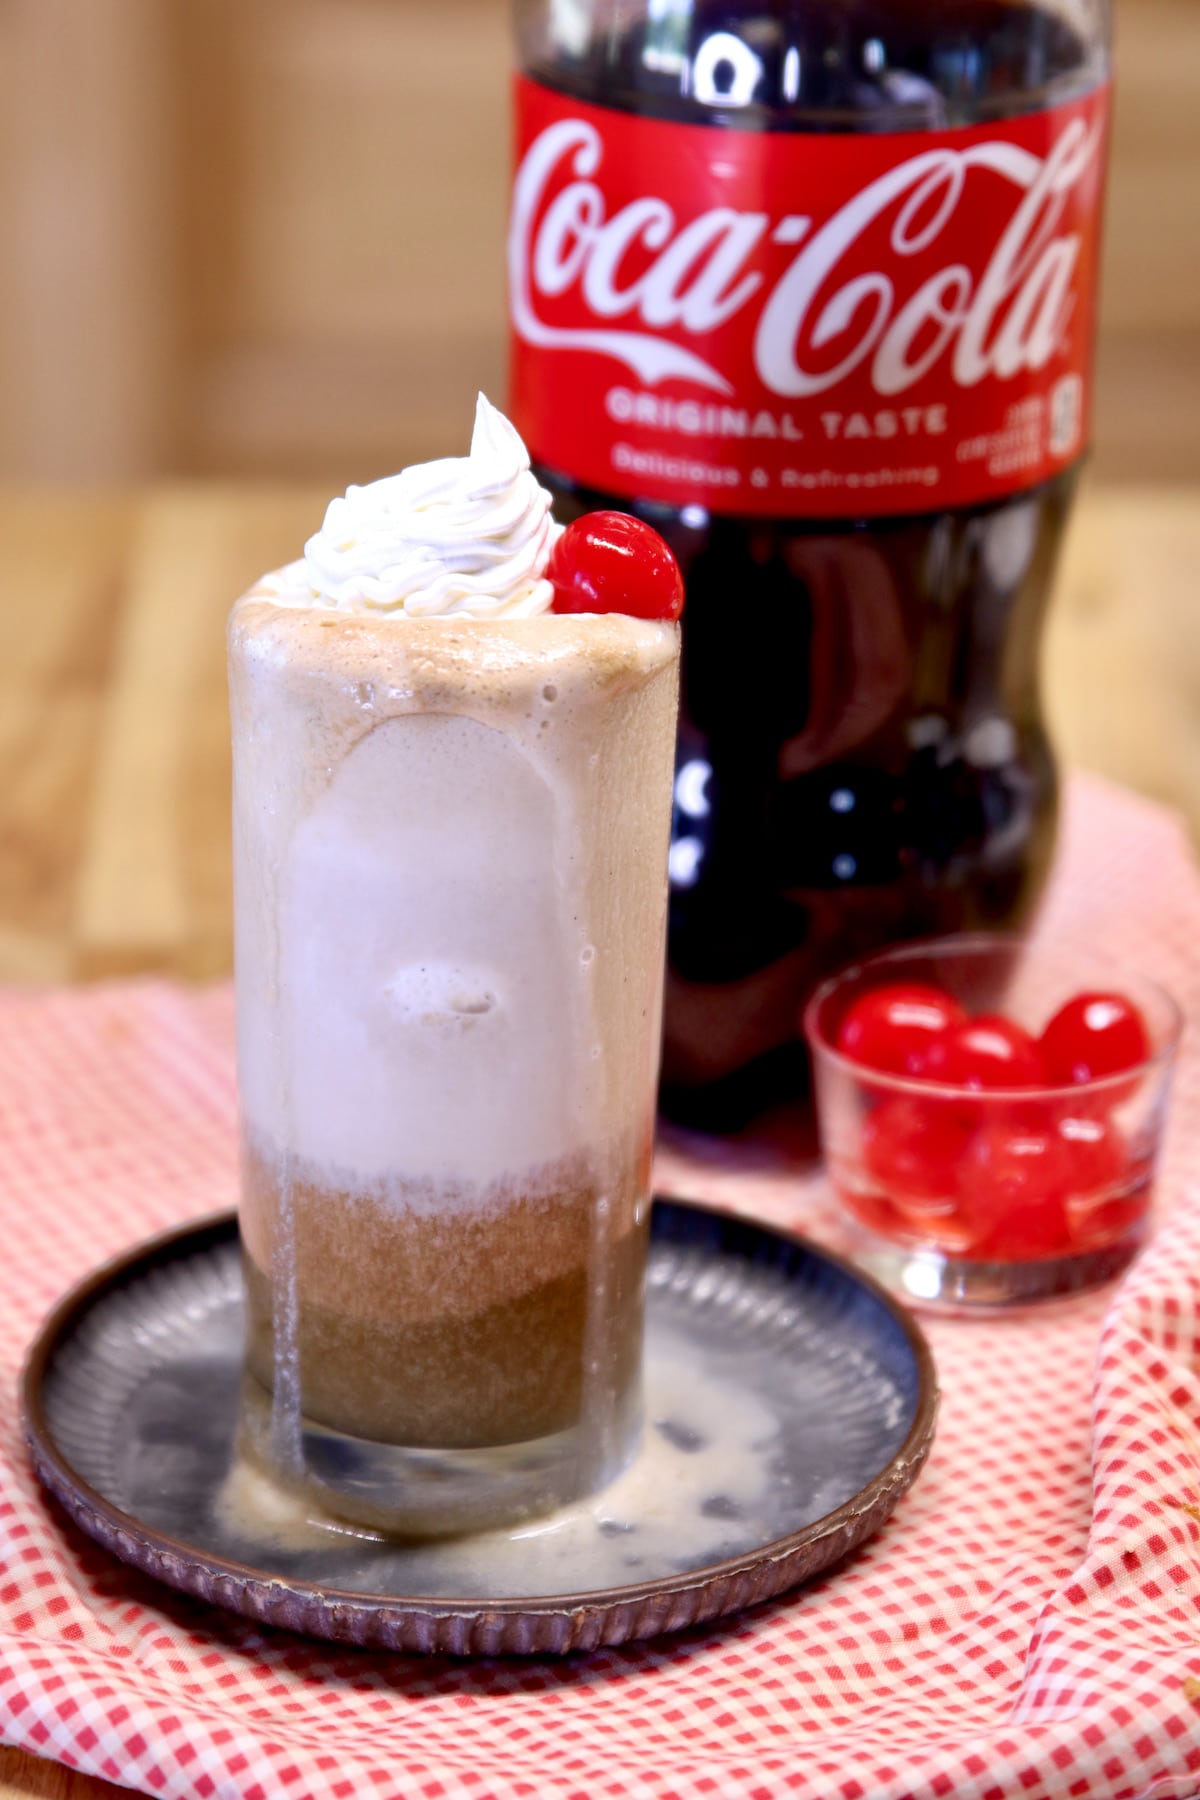 Coke float with rum in a glass, 2 liter bottle of Coca-Cola.